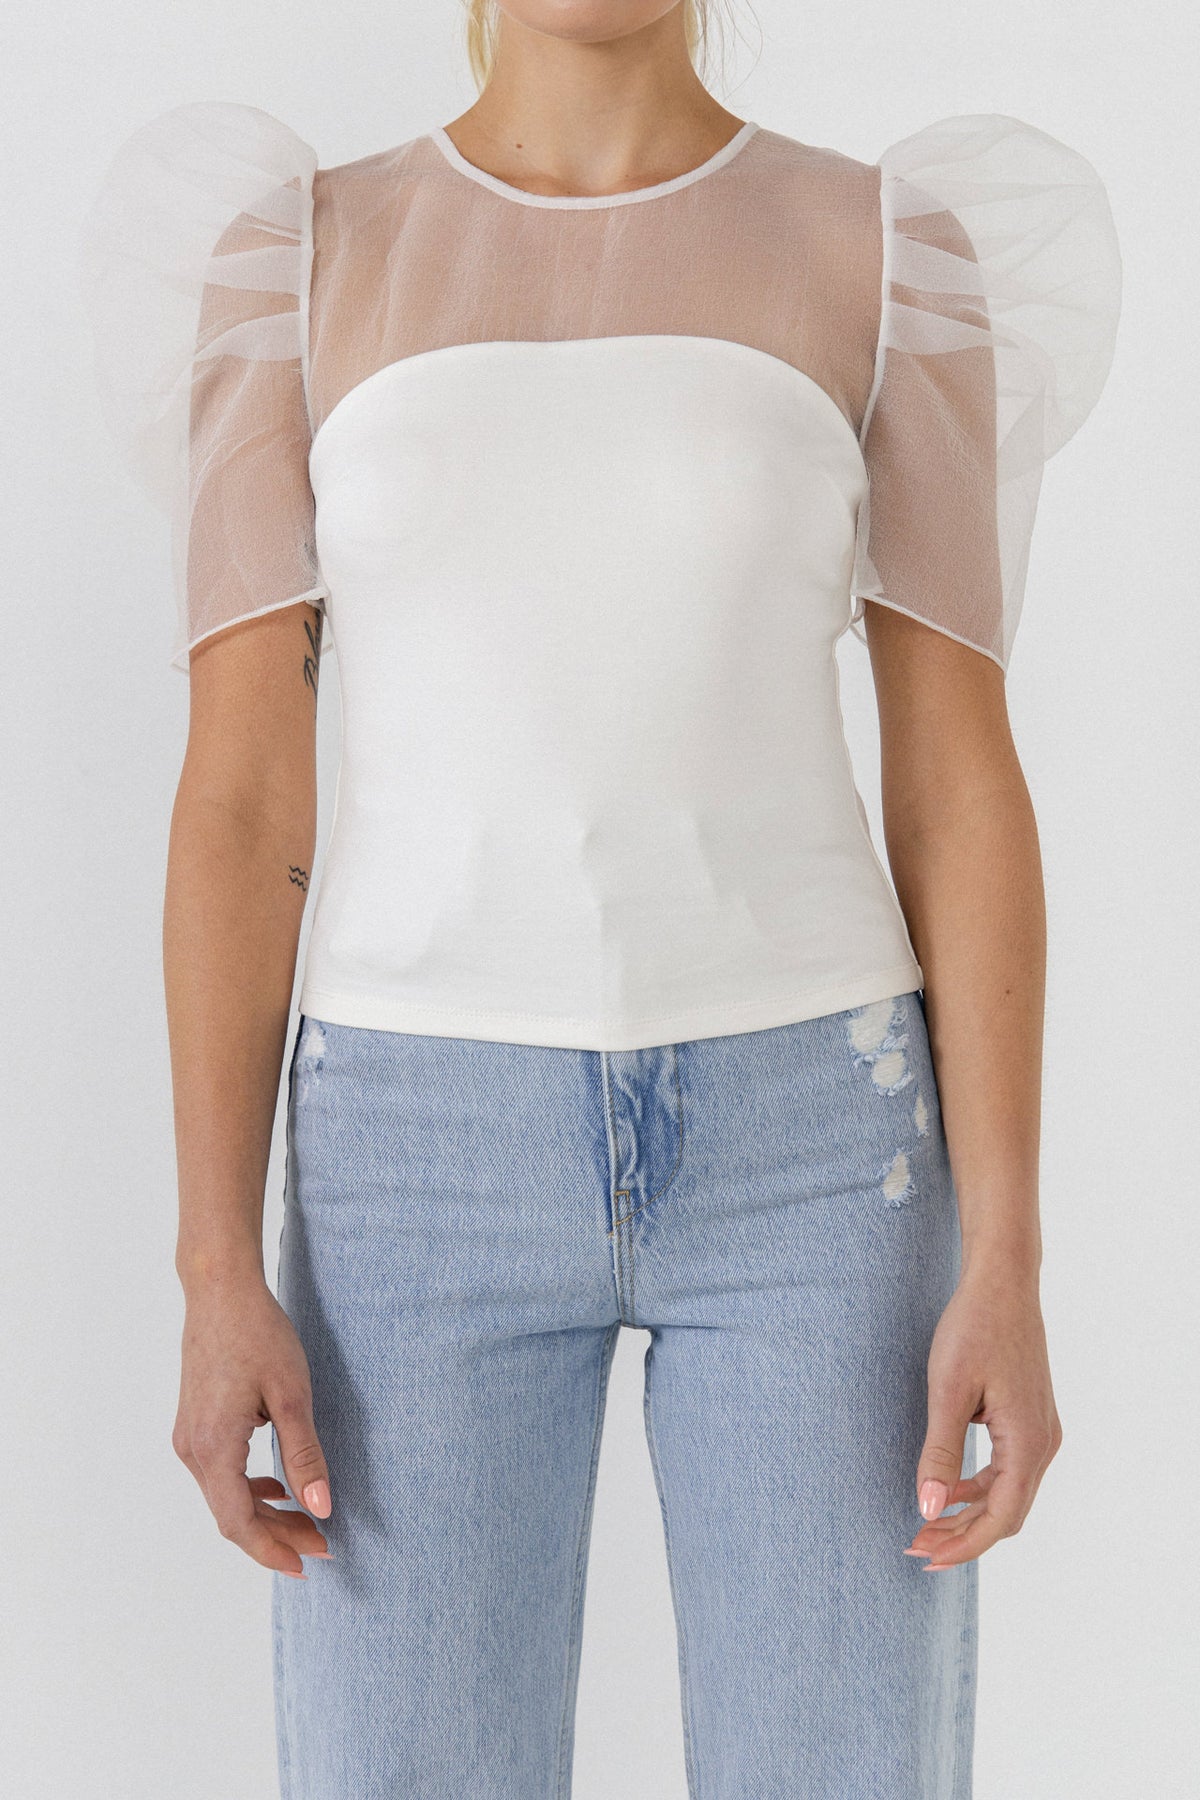 ENDLESS ROSE - Knit with Organza Mixed Media Top - TOPS available at Objectrare